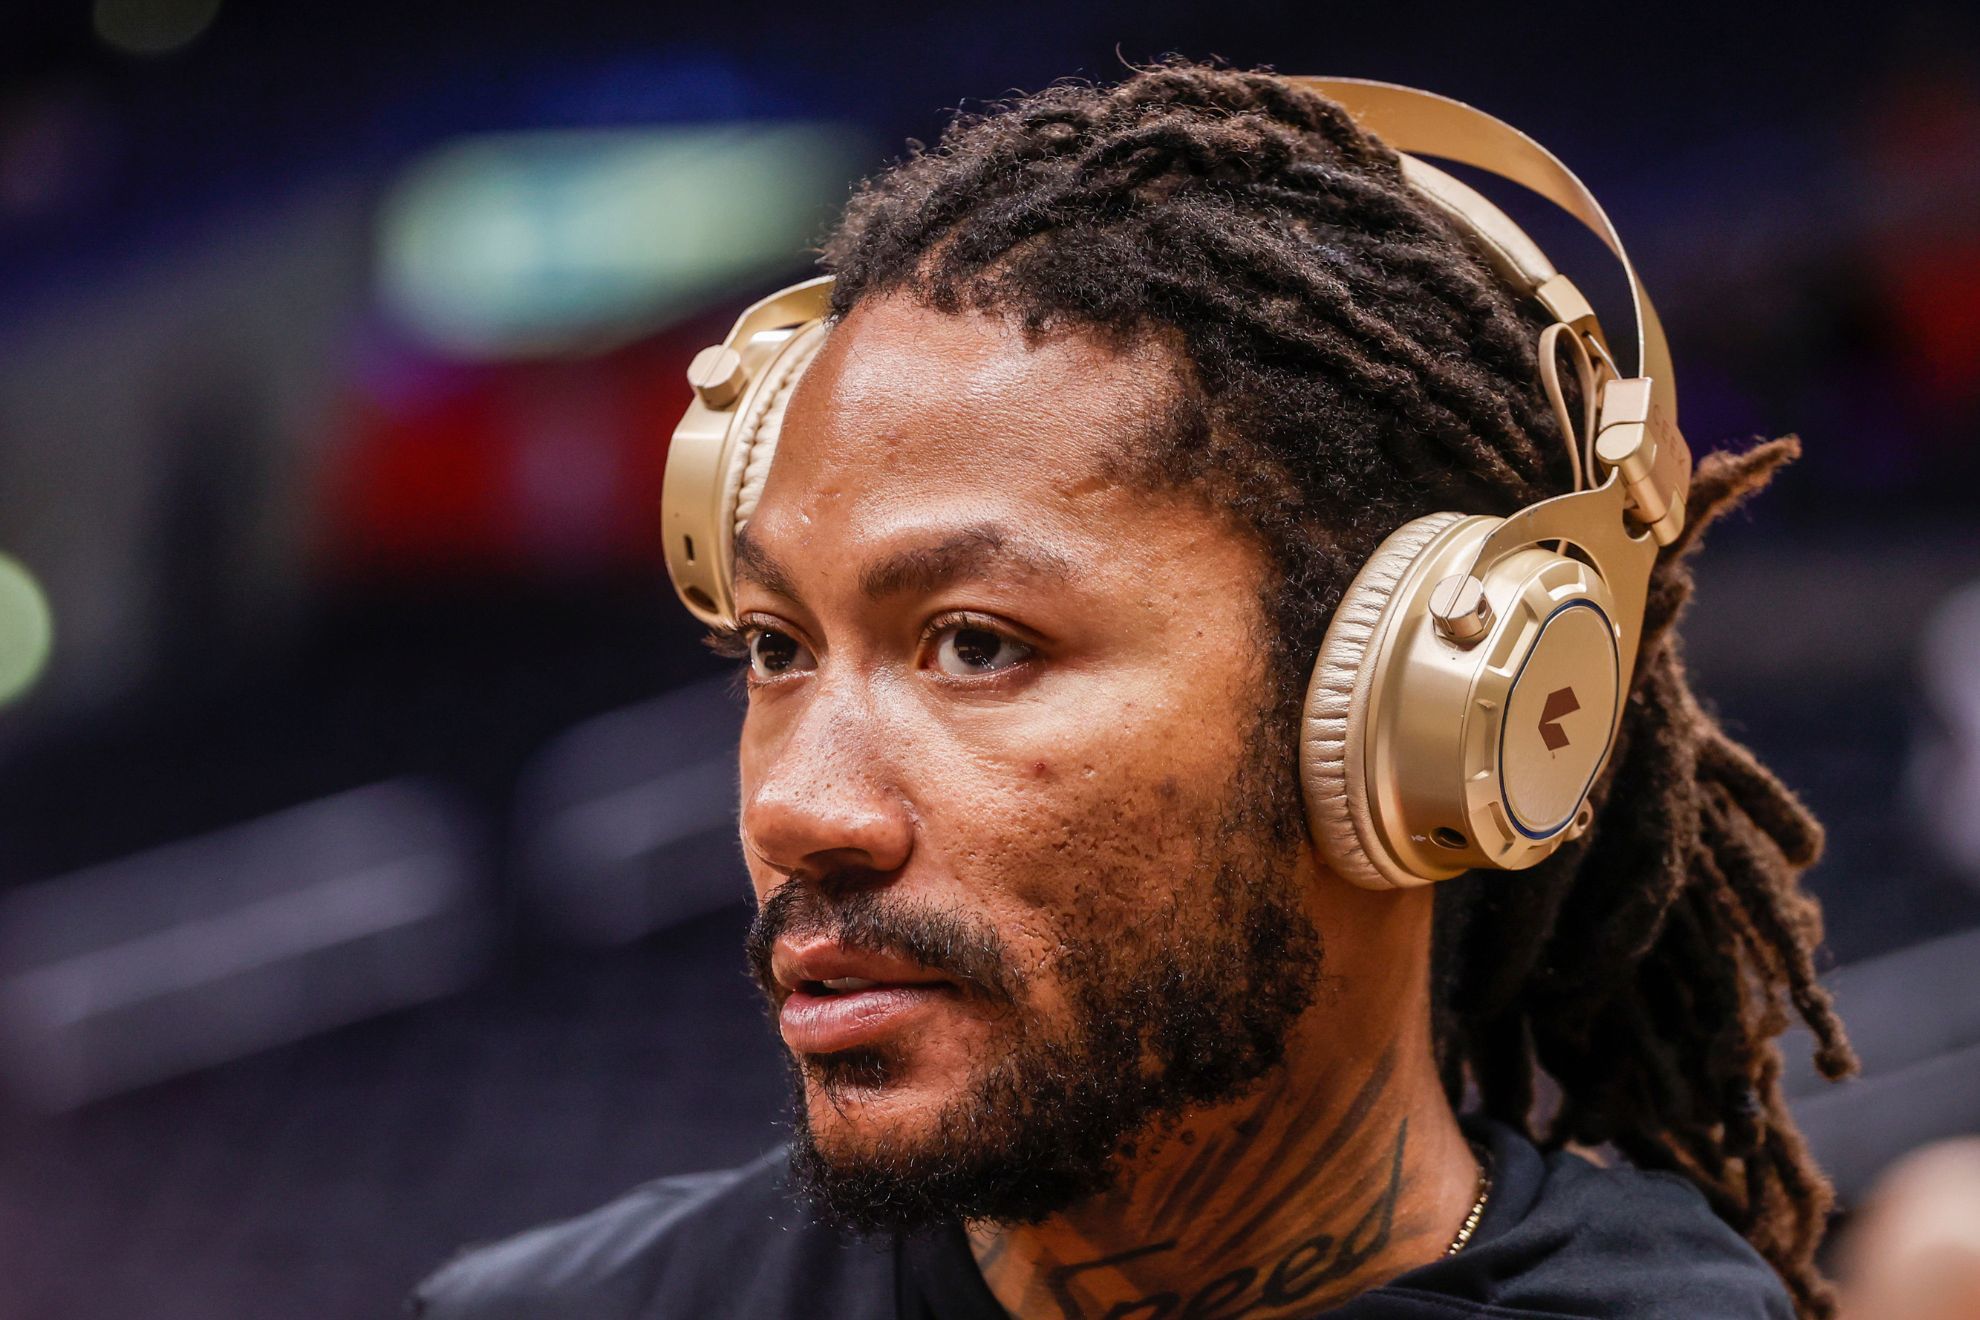 Derrick Rose to Lakers? Knicks decline his option and he is now a free agent